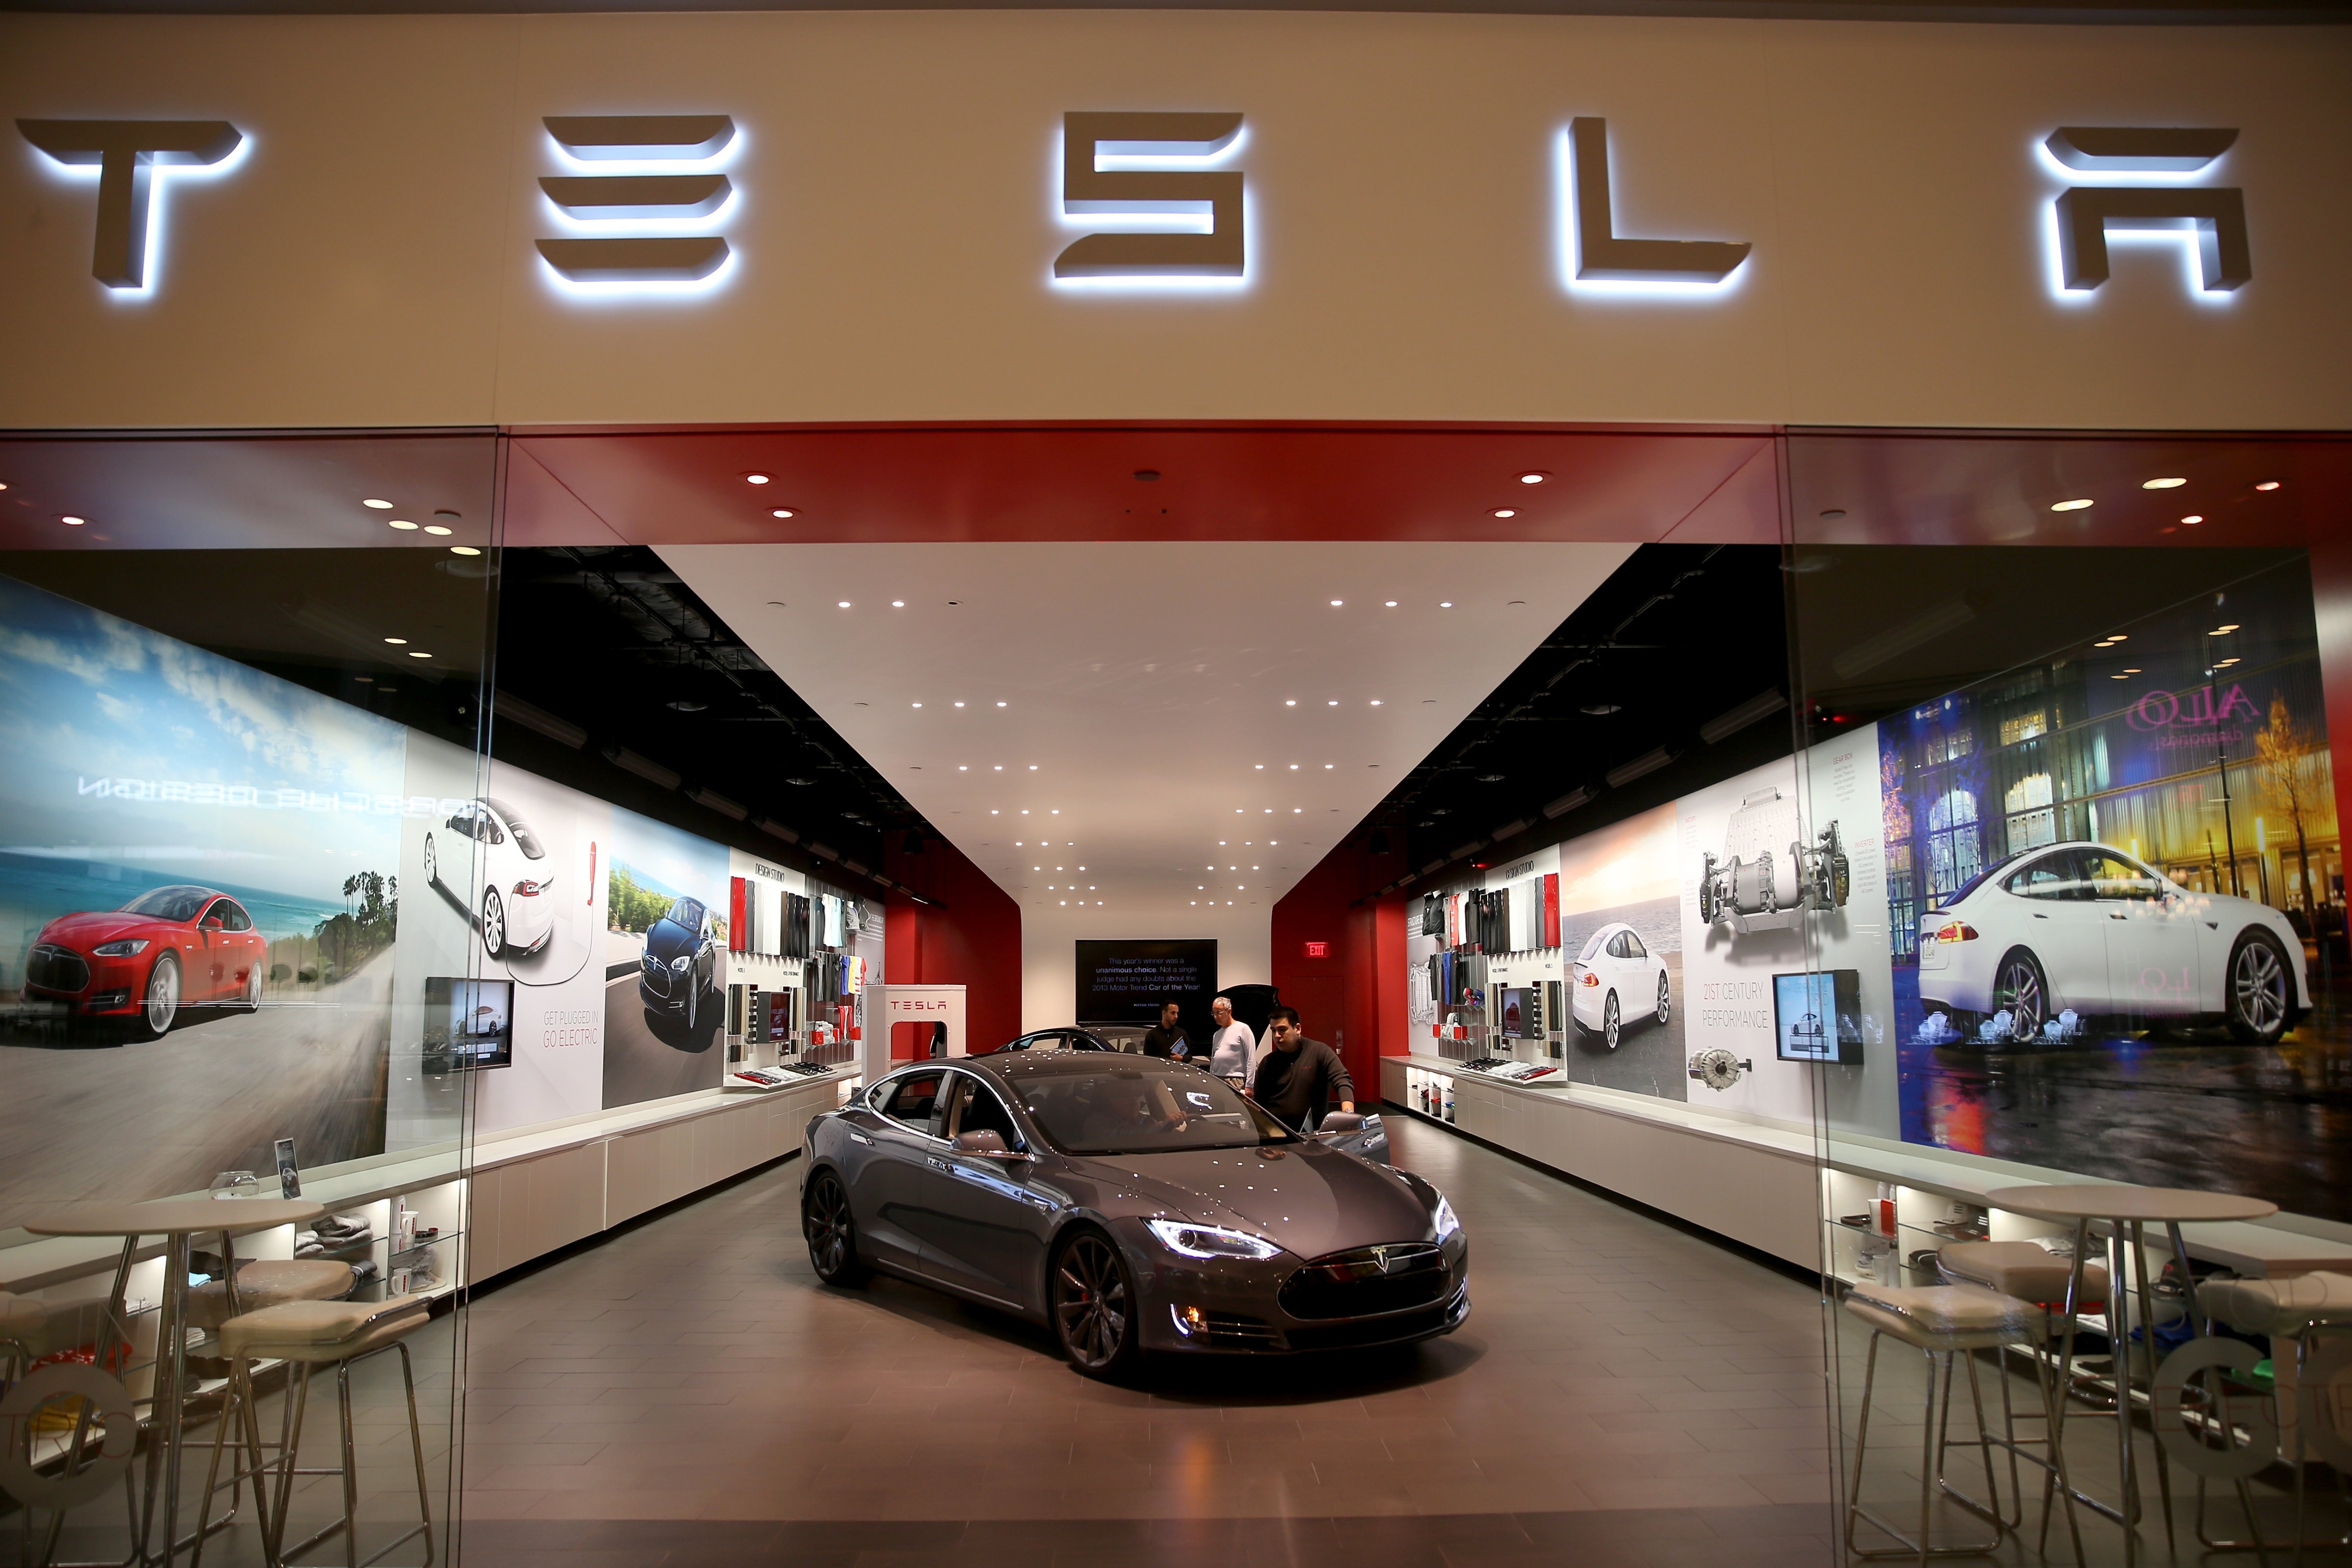 People look at a Tesla Motors vehicle on the showroom floor at the Dadeland Mall on February 19, 2014 in Miami, Florida. (Joe Raedle&mdash;Getty Images)